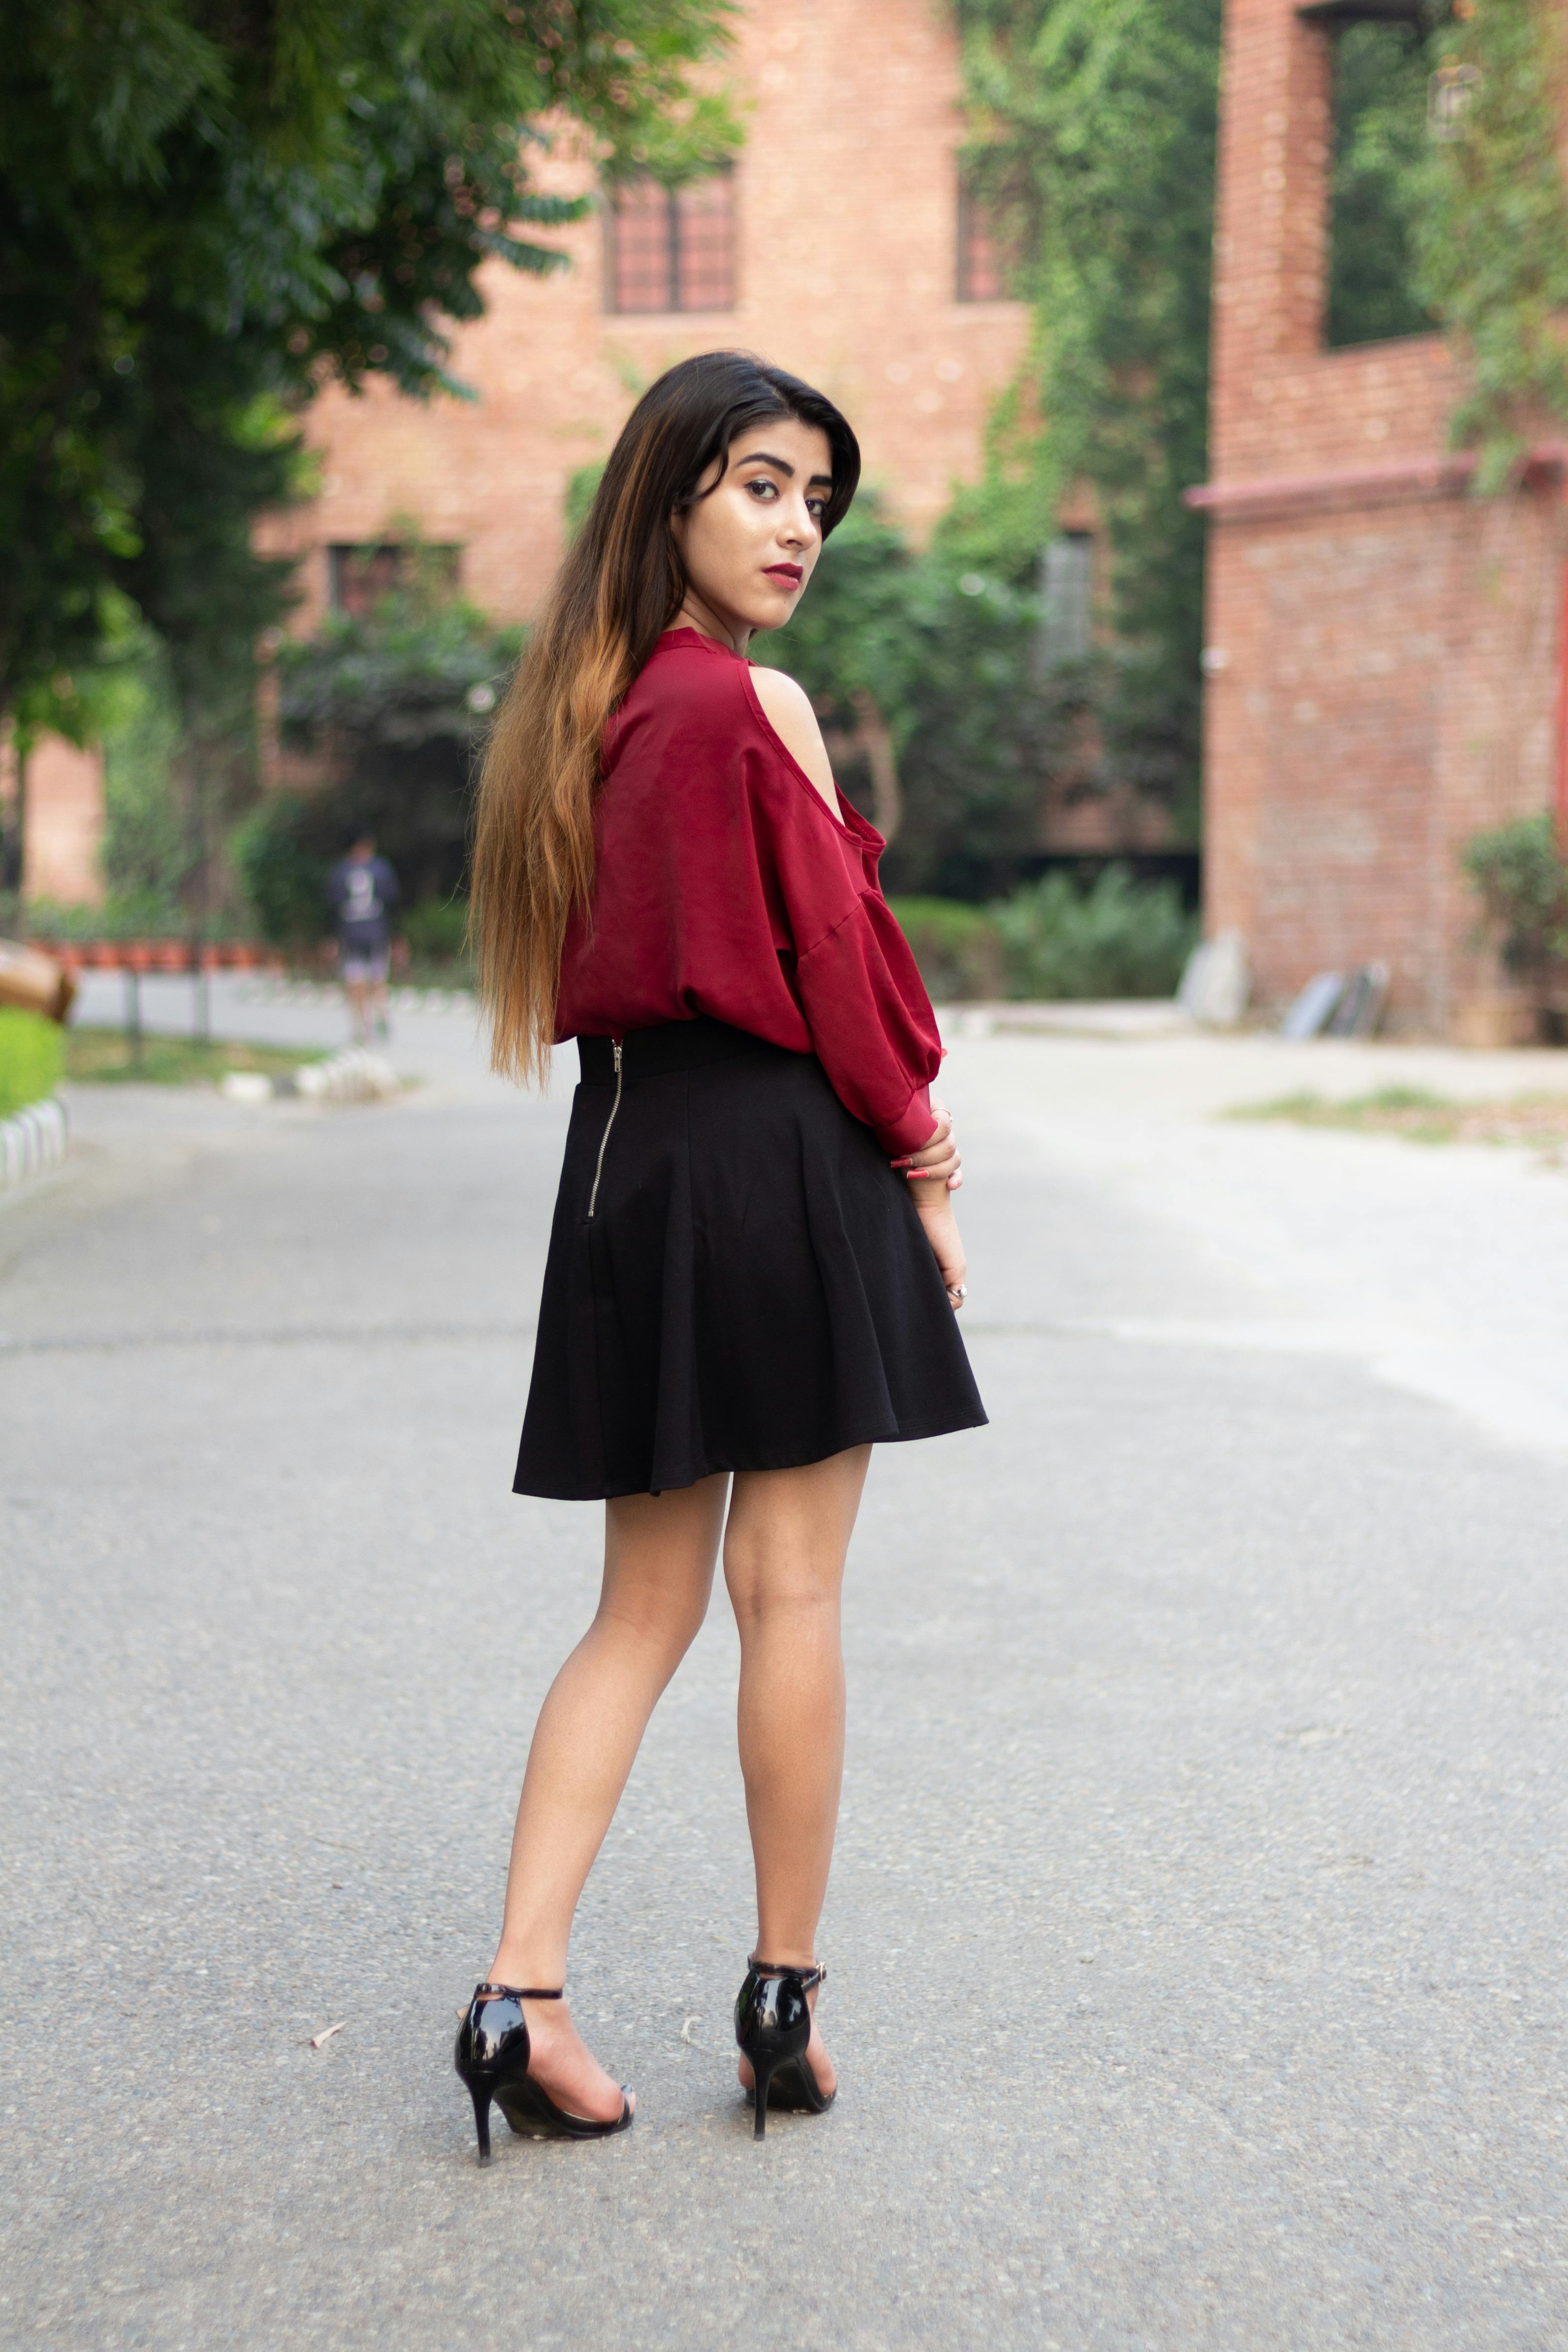 A Woman in Red Blouse Black Skirt · Free Stock Photo